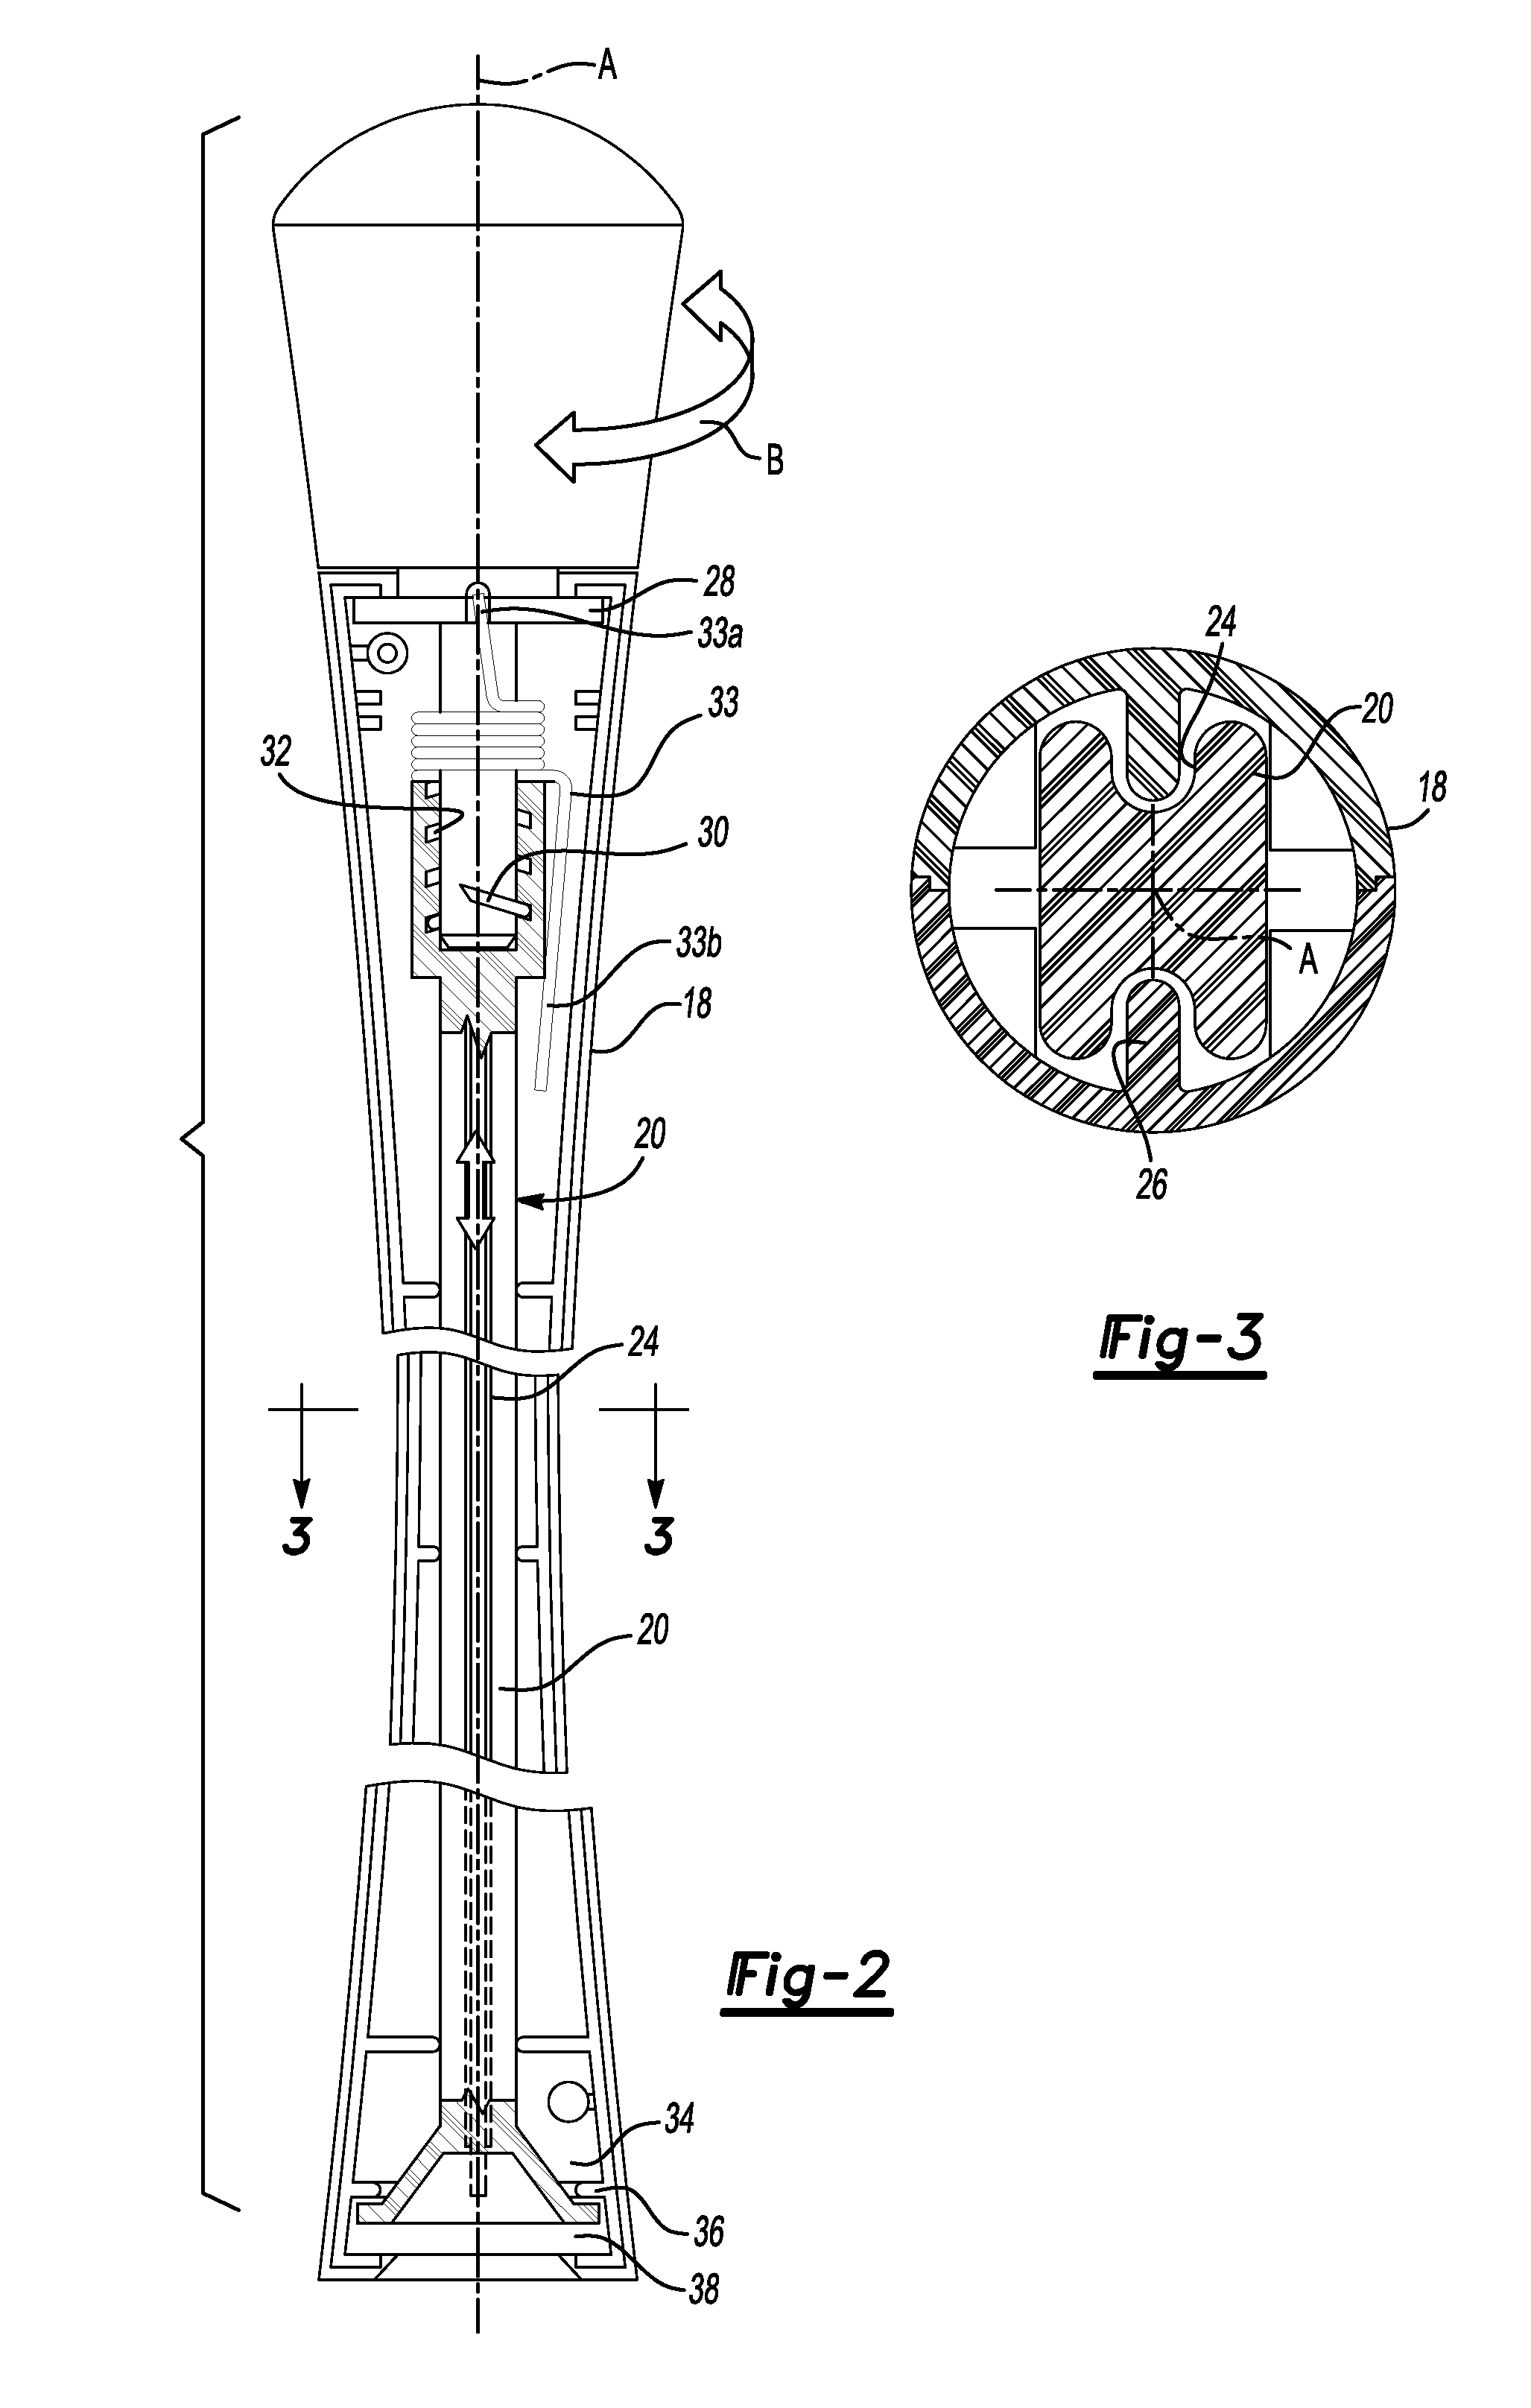 Releasable handle mechanism for a disposable toilet implement